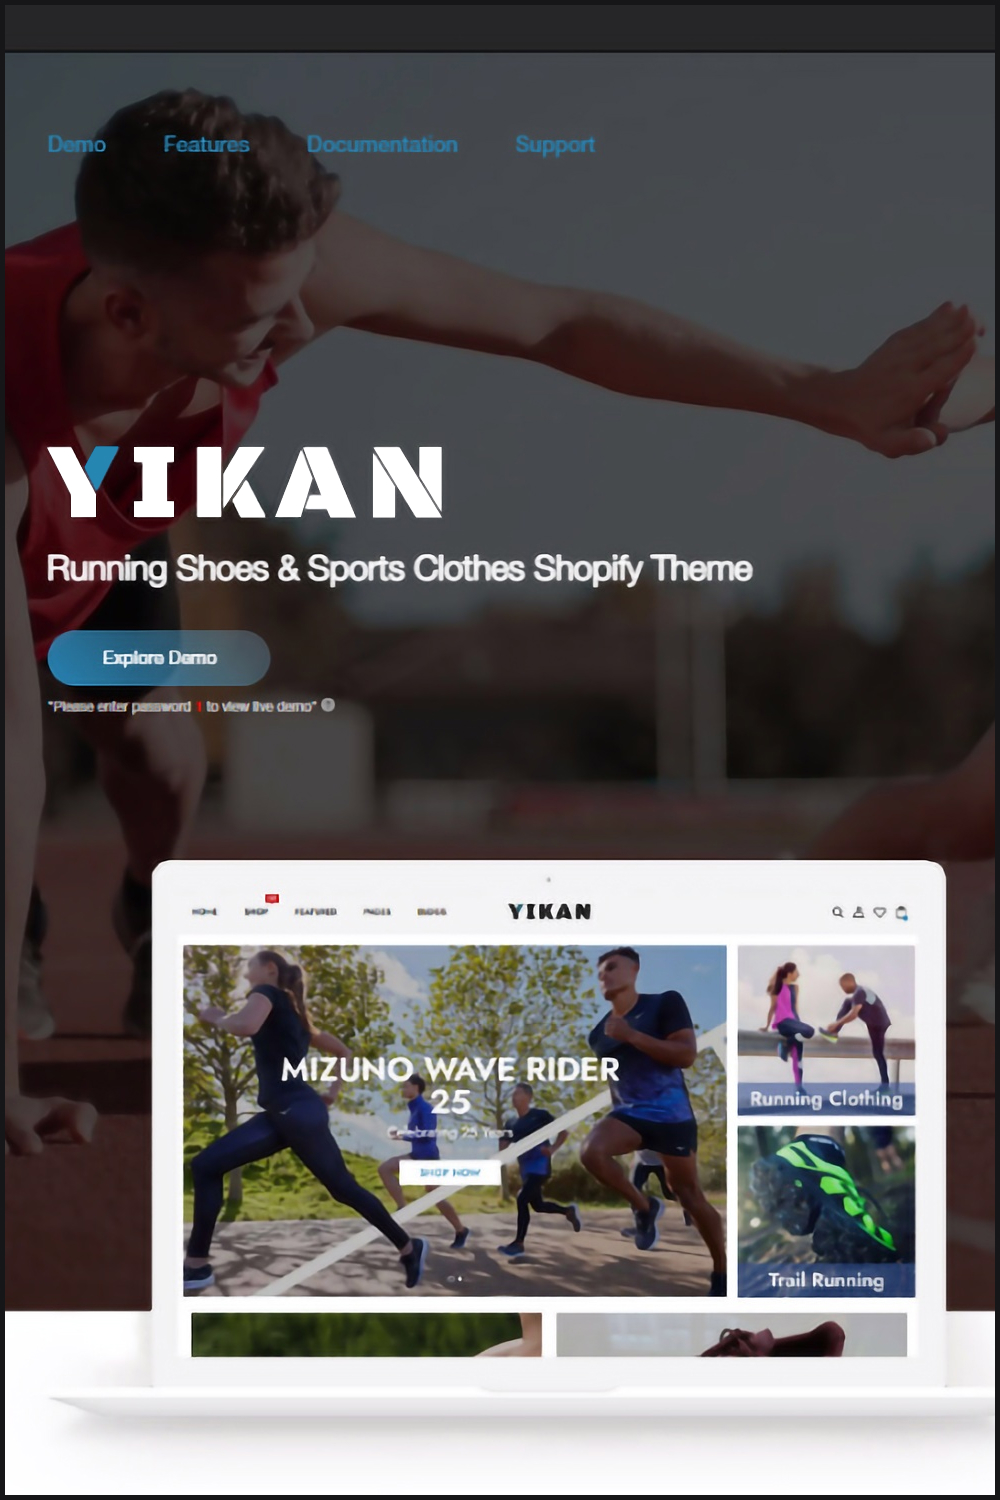 yikan running shoes sports clothes shopify theme 02 485